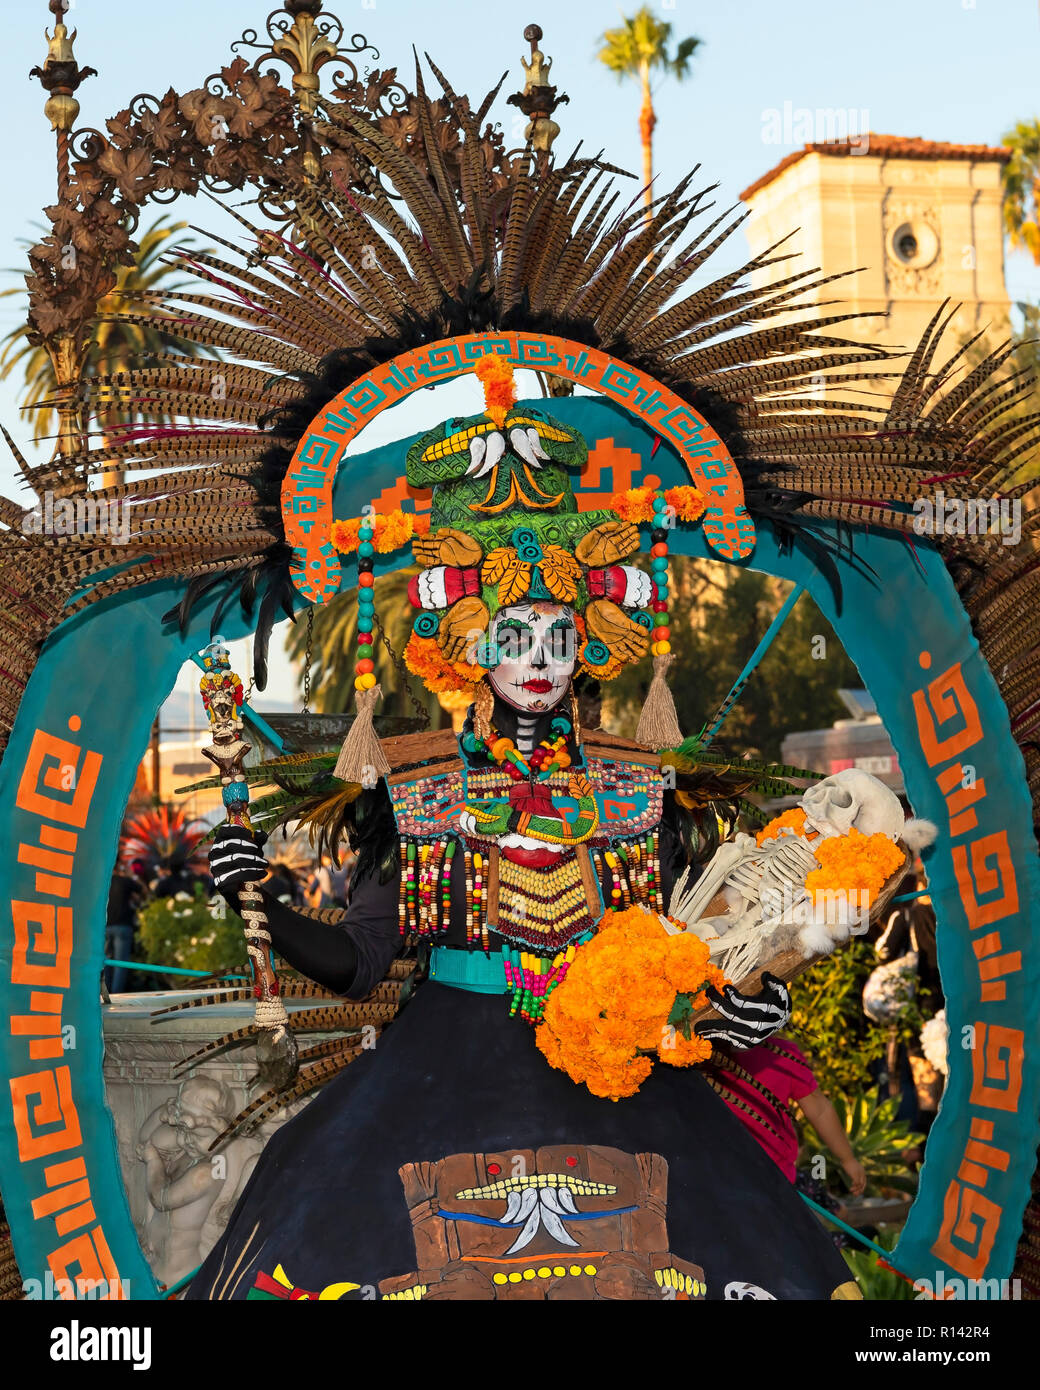 Dia de los Muertos Day of the Dead event at Hollywood Forever Cemetery